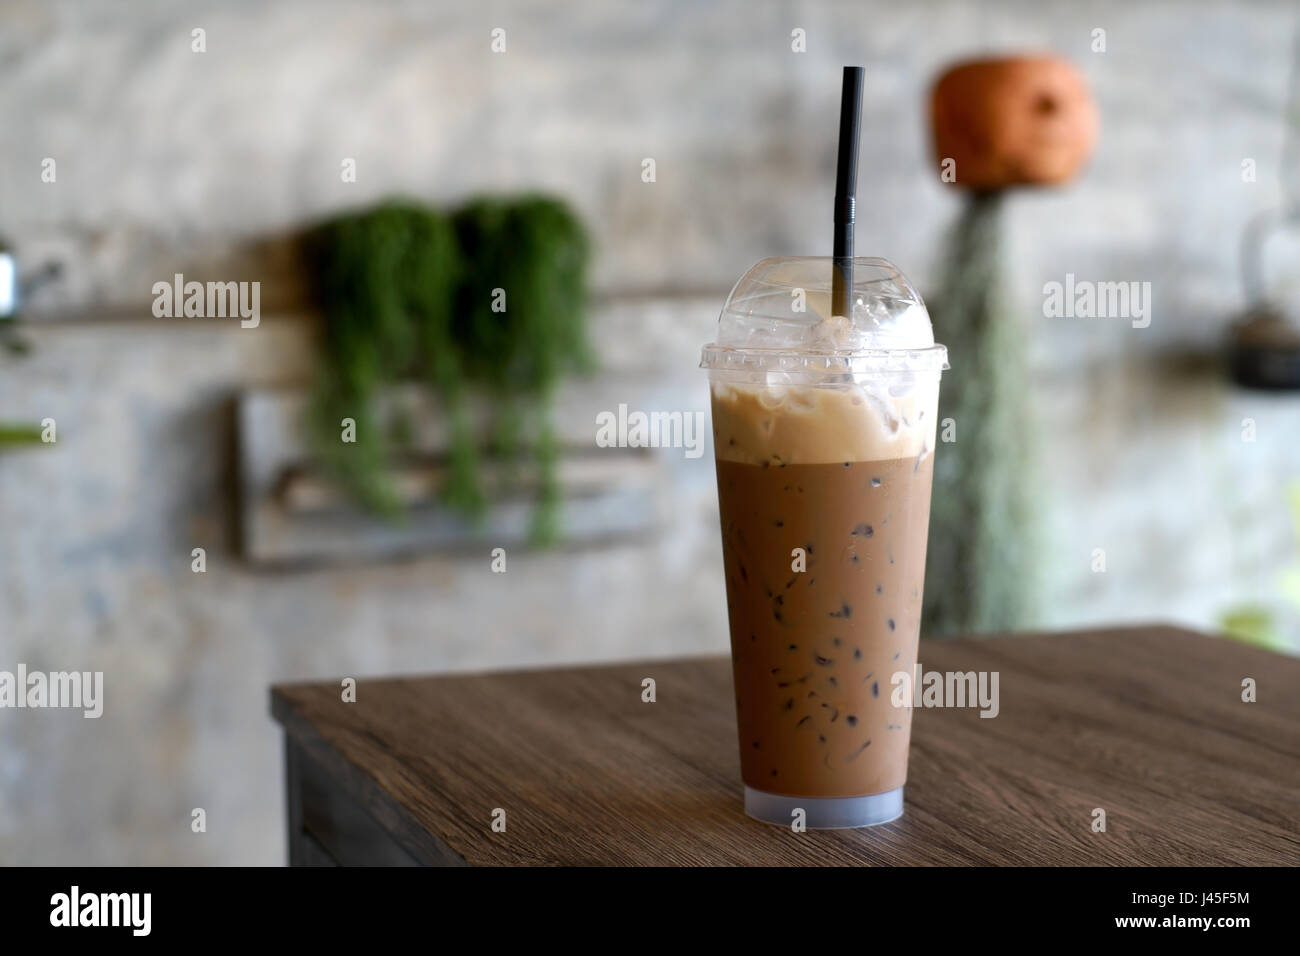 https://c8.alamy.com/comp/J45F5M/ice-coffee-in-takeaway-cup-on-wooden-table-J45F5M.jpg